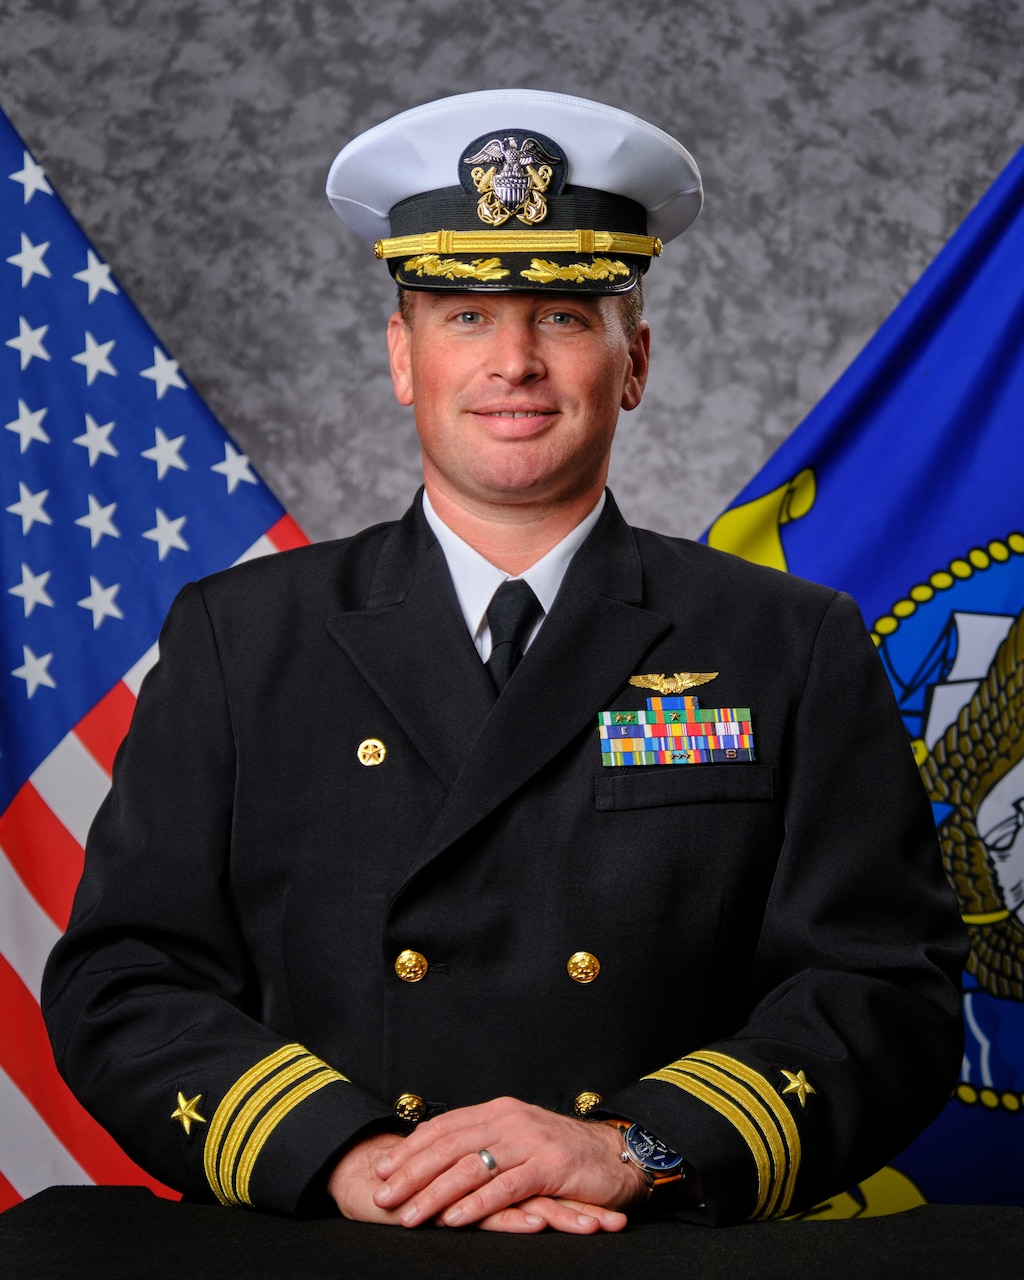 Official photo of CDR Maynes